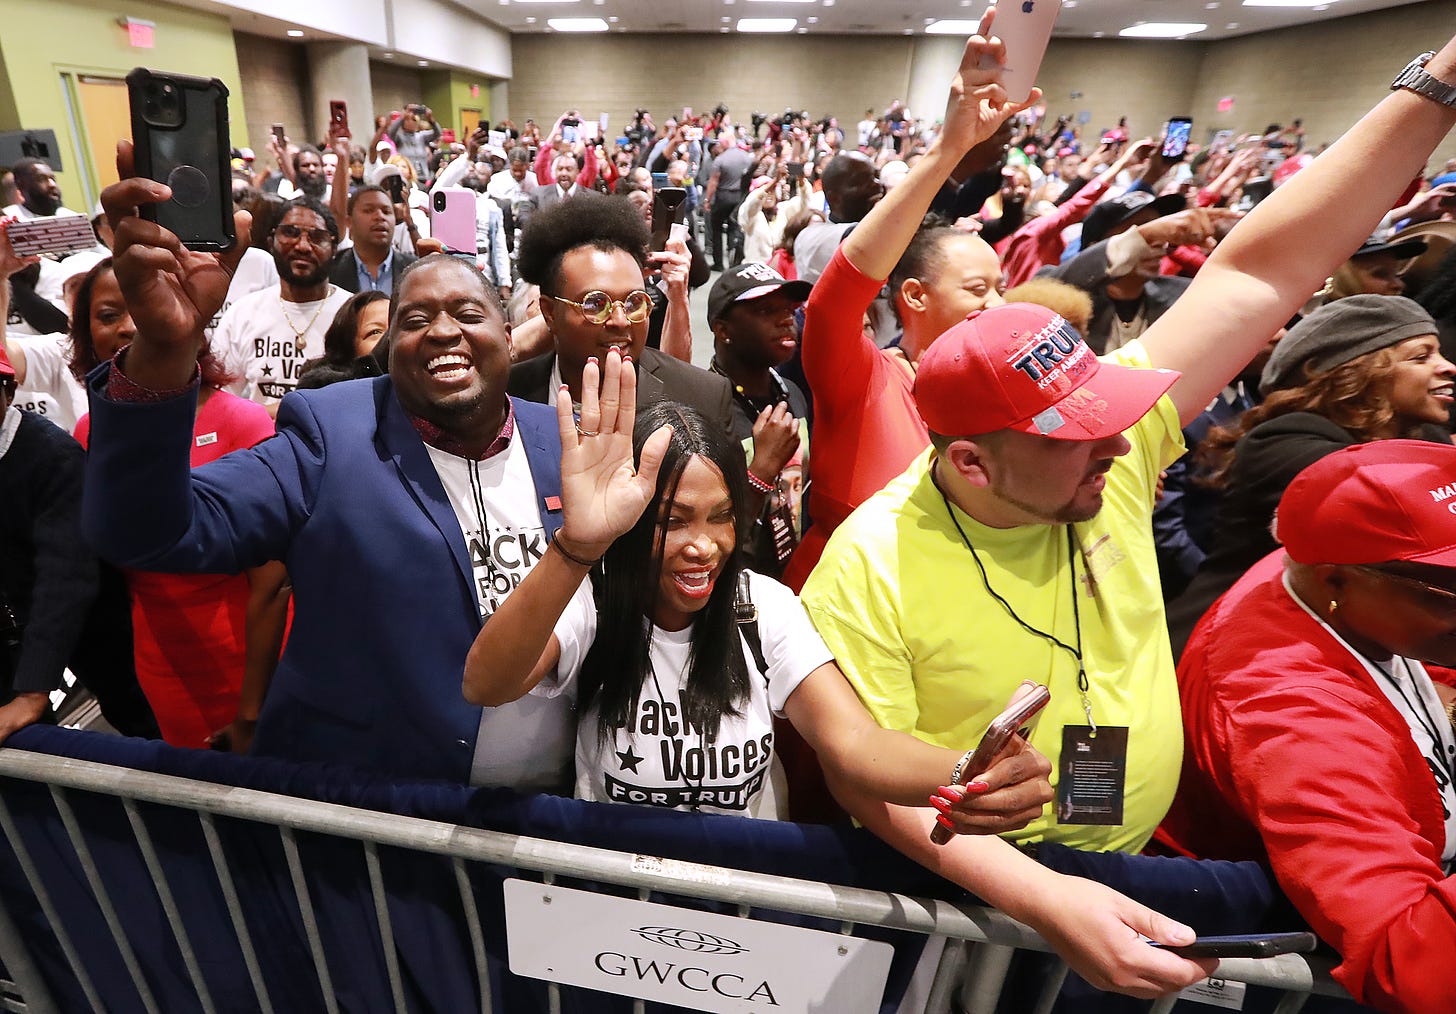 Trump visited Atlanta to court black voters. Here's what happened.